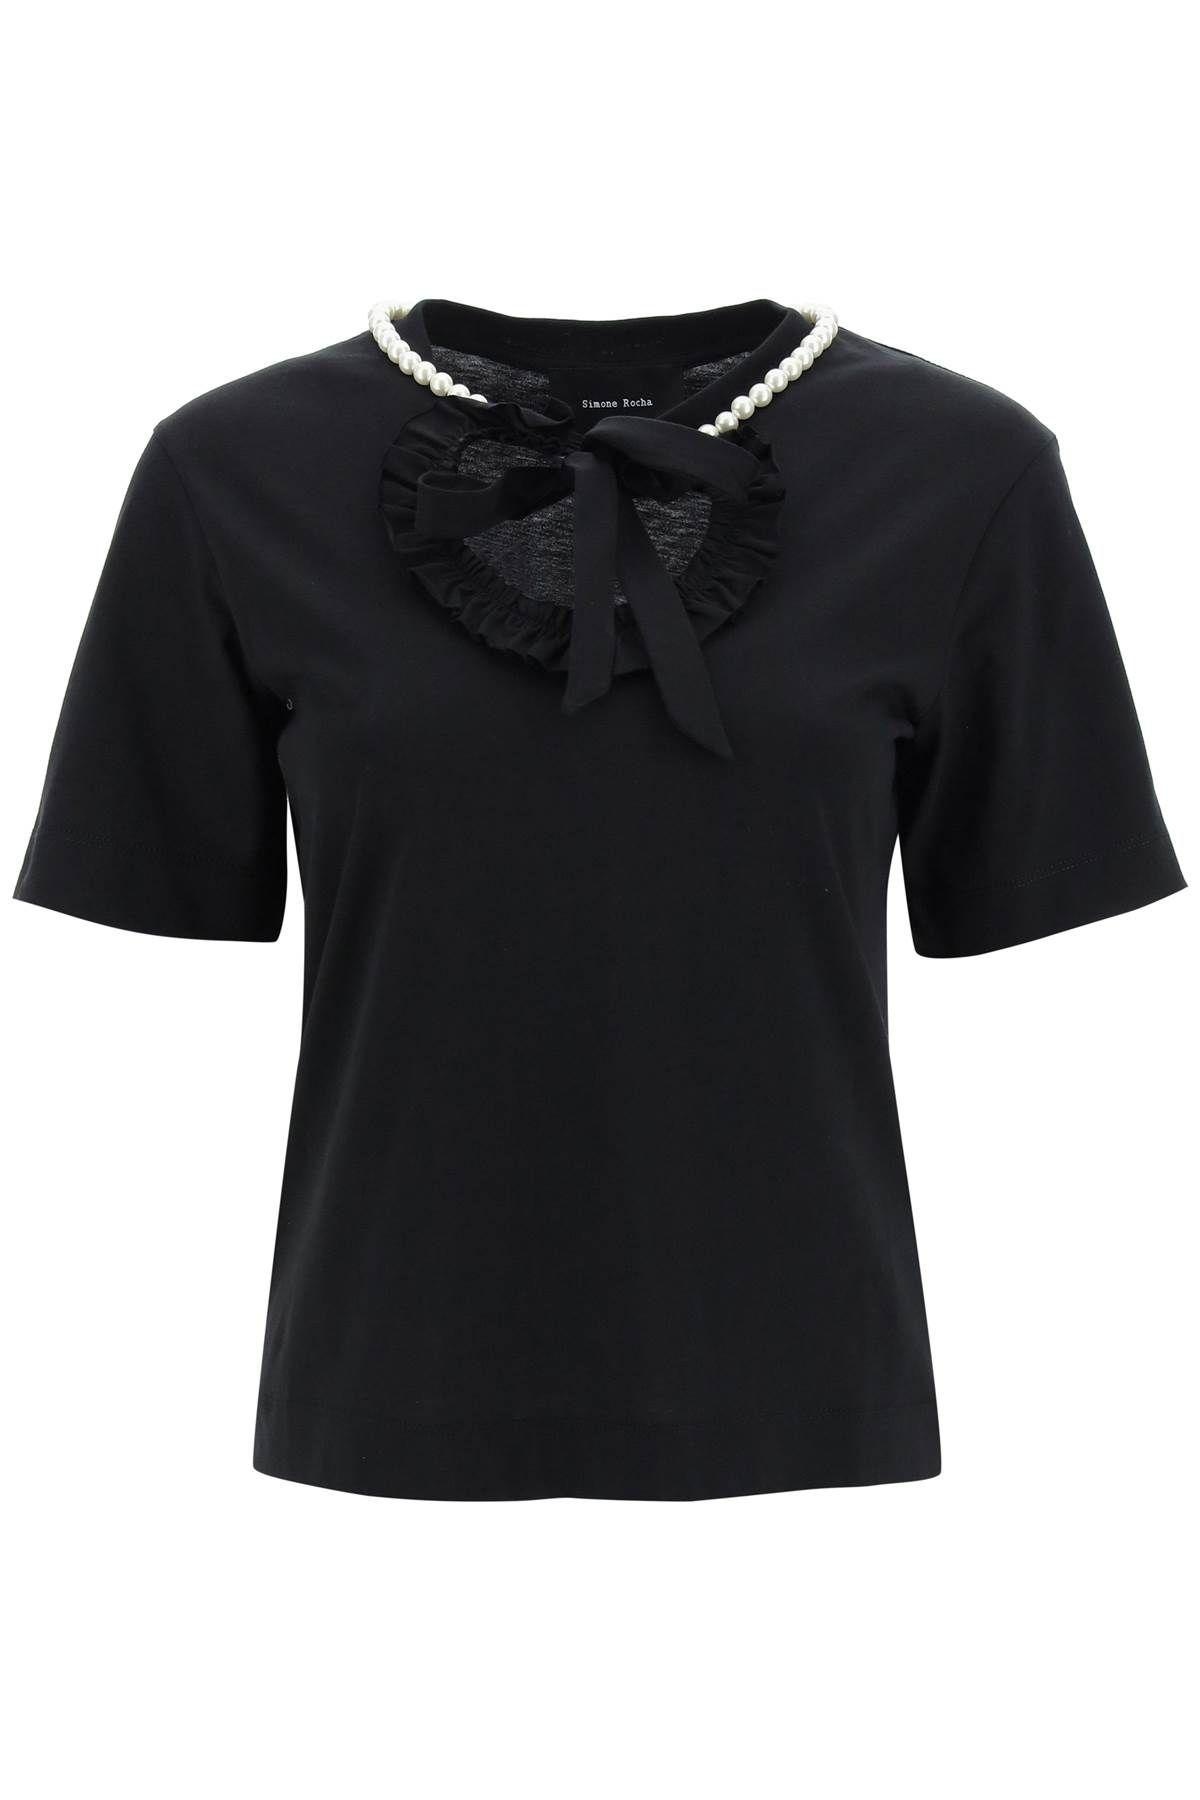 T-SHIRT WITH HEART-SHAPED CUT-OUT AND PEARLS SIMONE ROCHA - 1